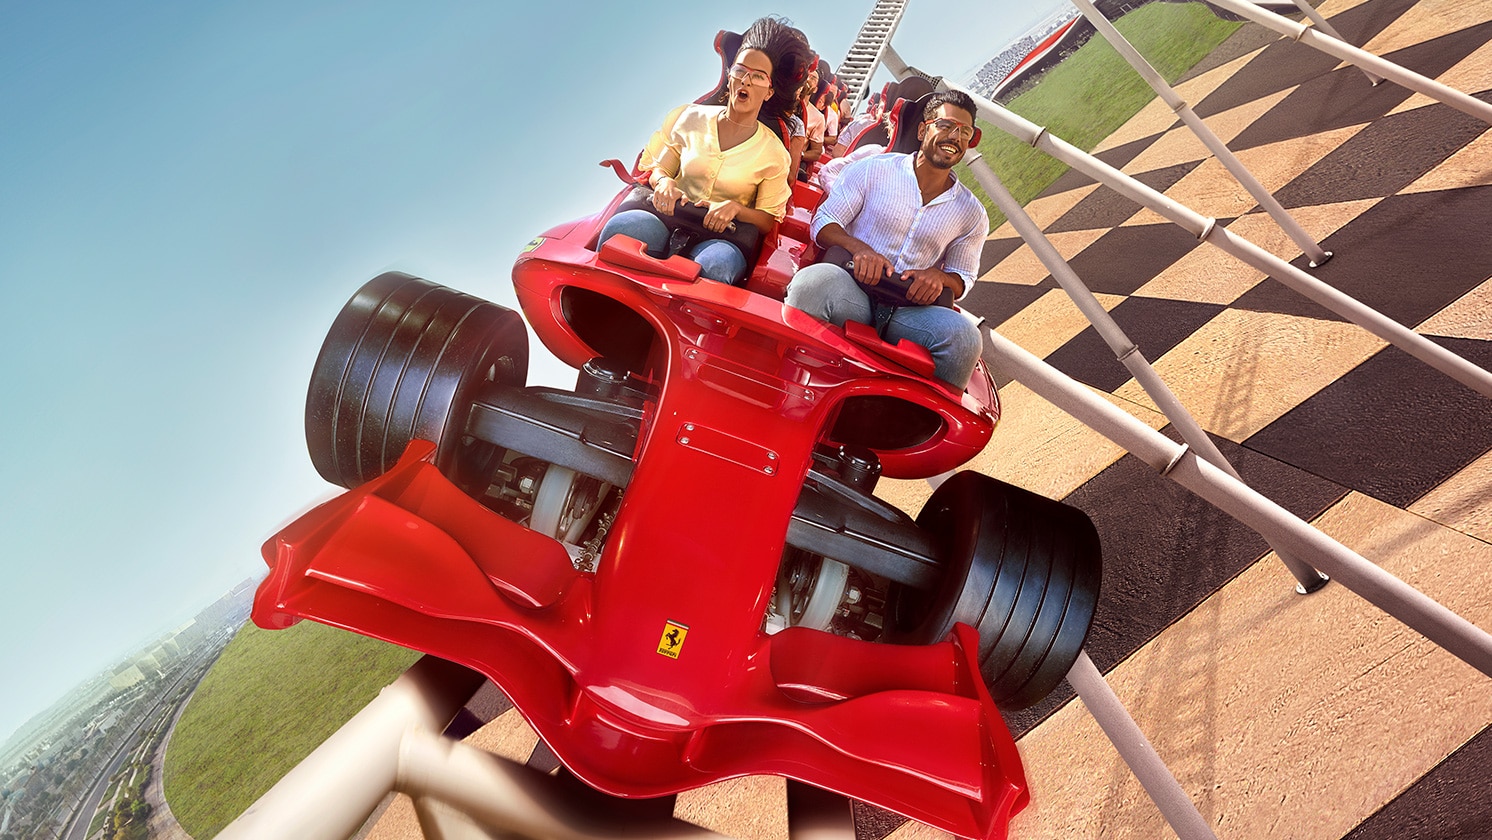 Rides and Attractions World Abu Dhabi